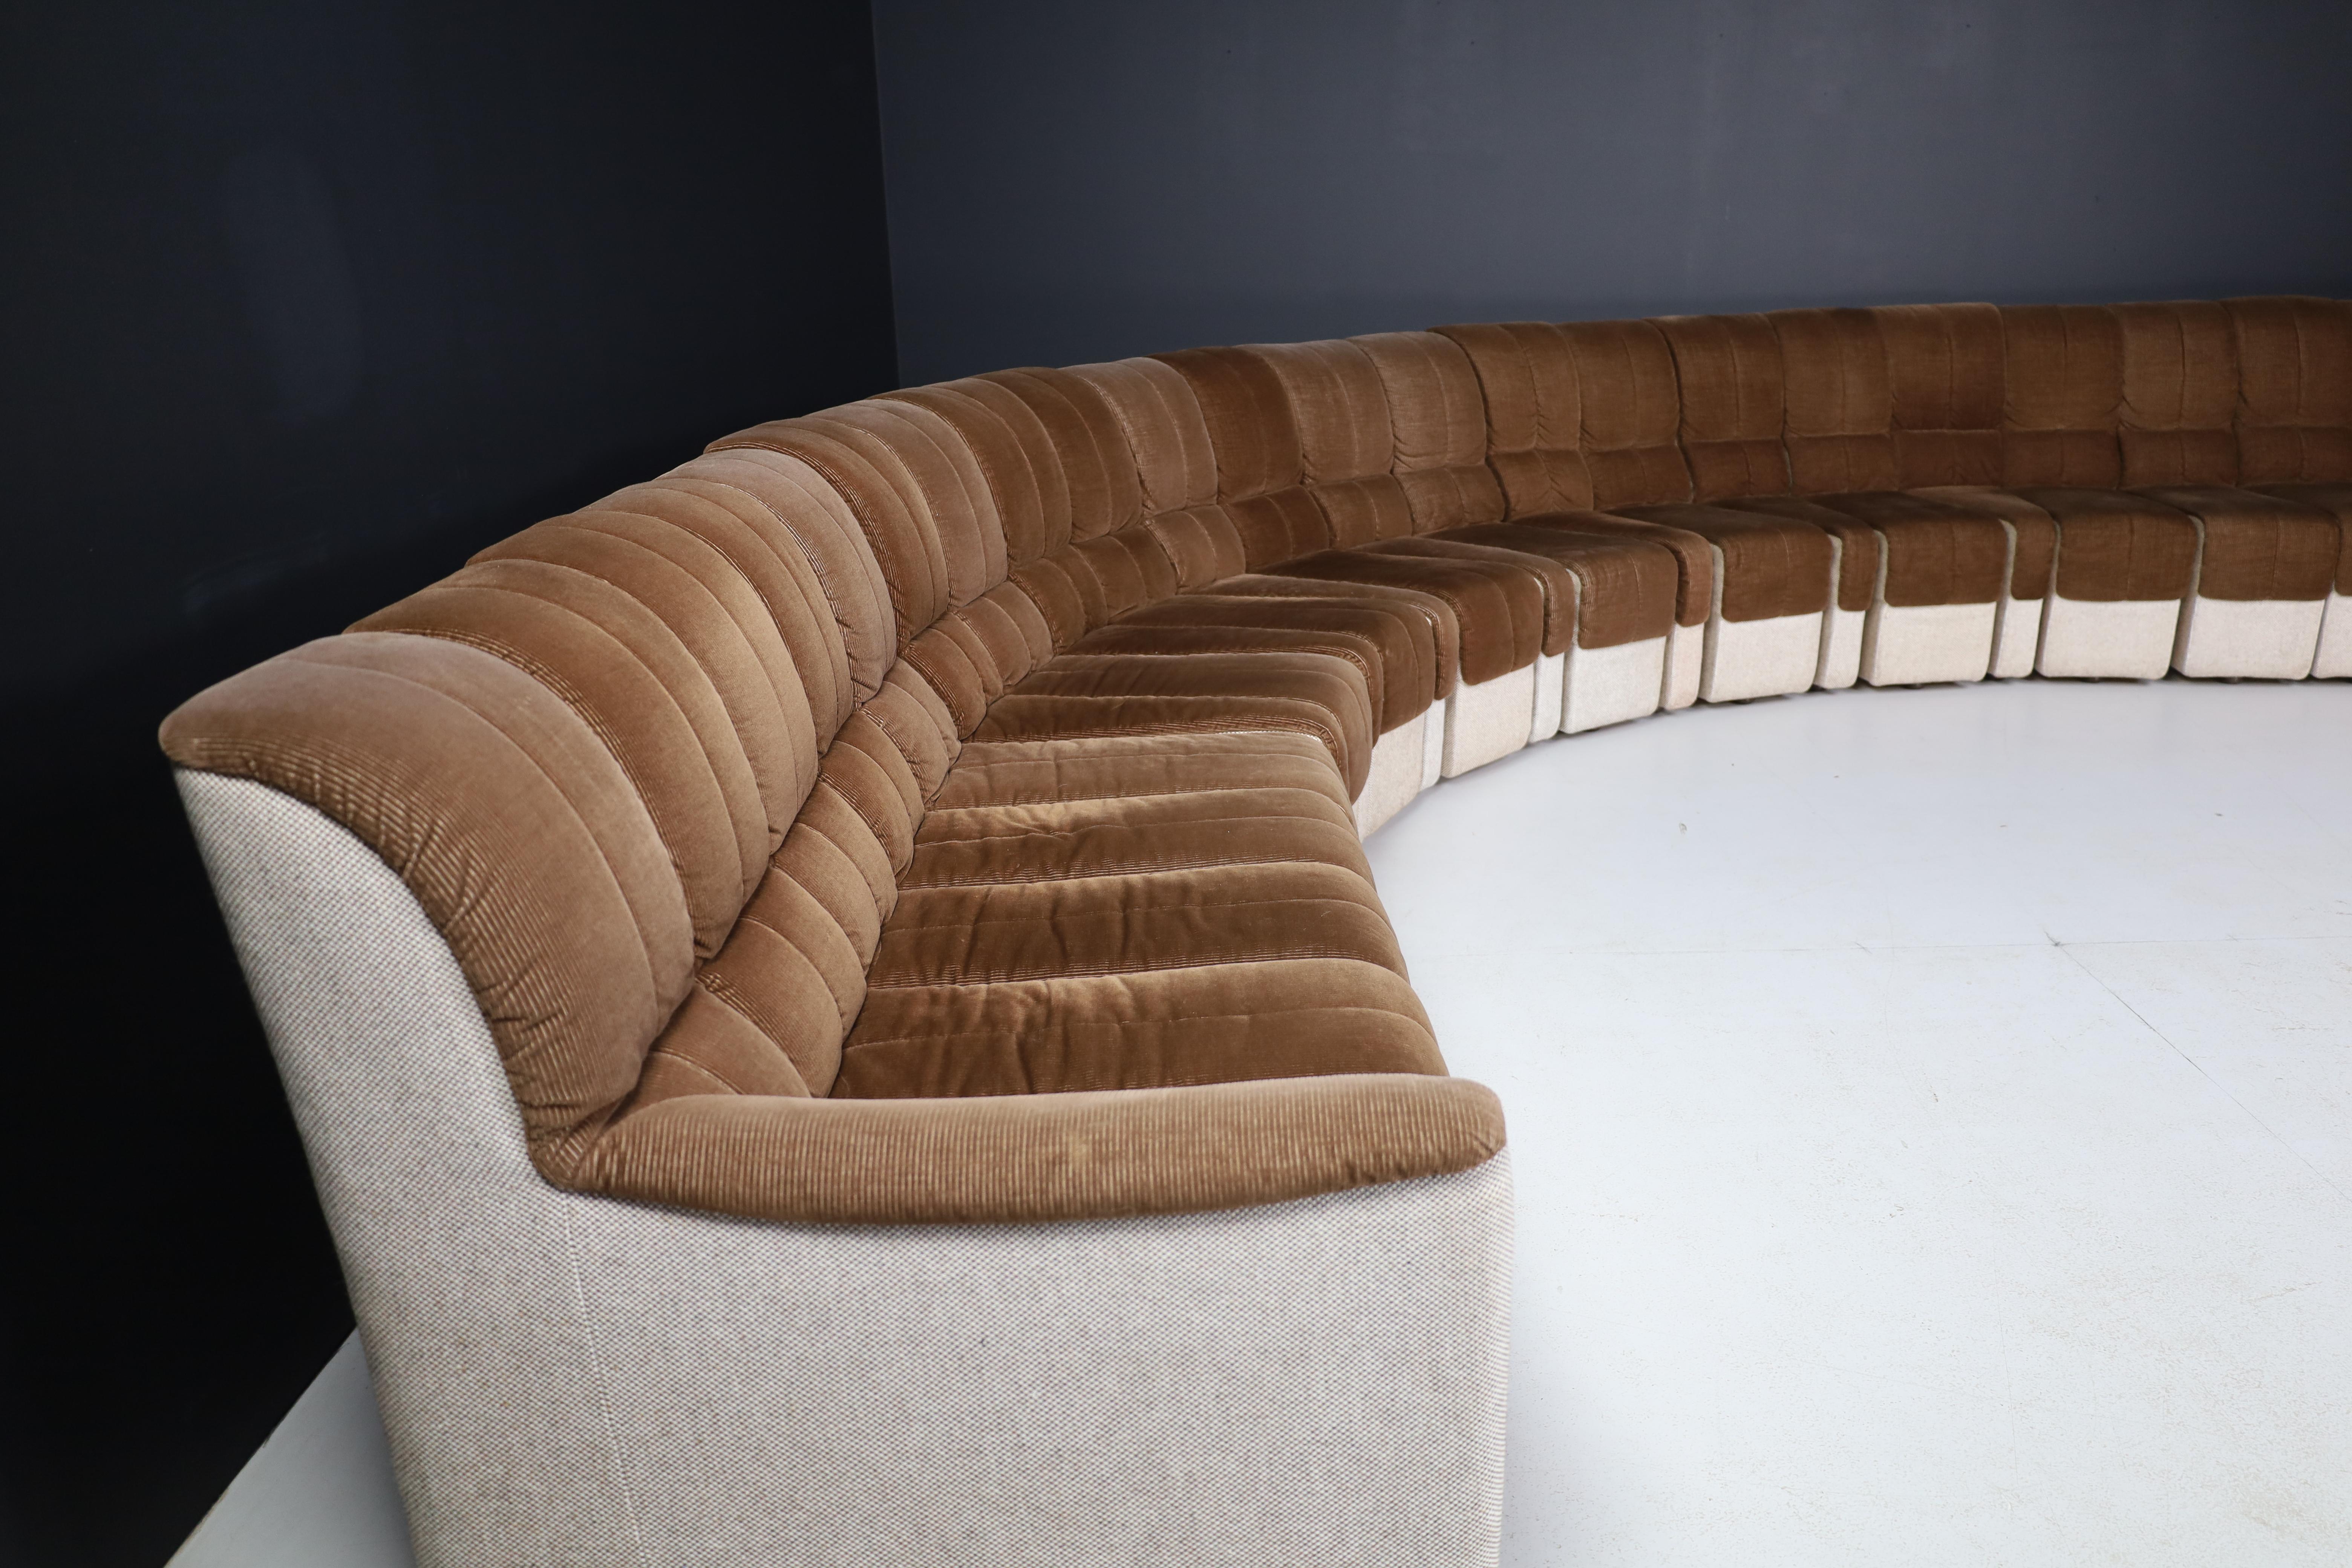 De Sede DS-600 Style Round Sofa in Corduroy Fabric, Germany, 1970s For Sale 6